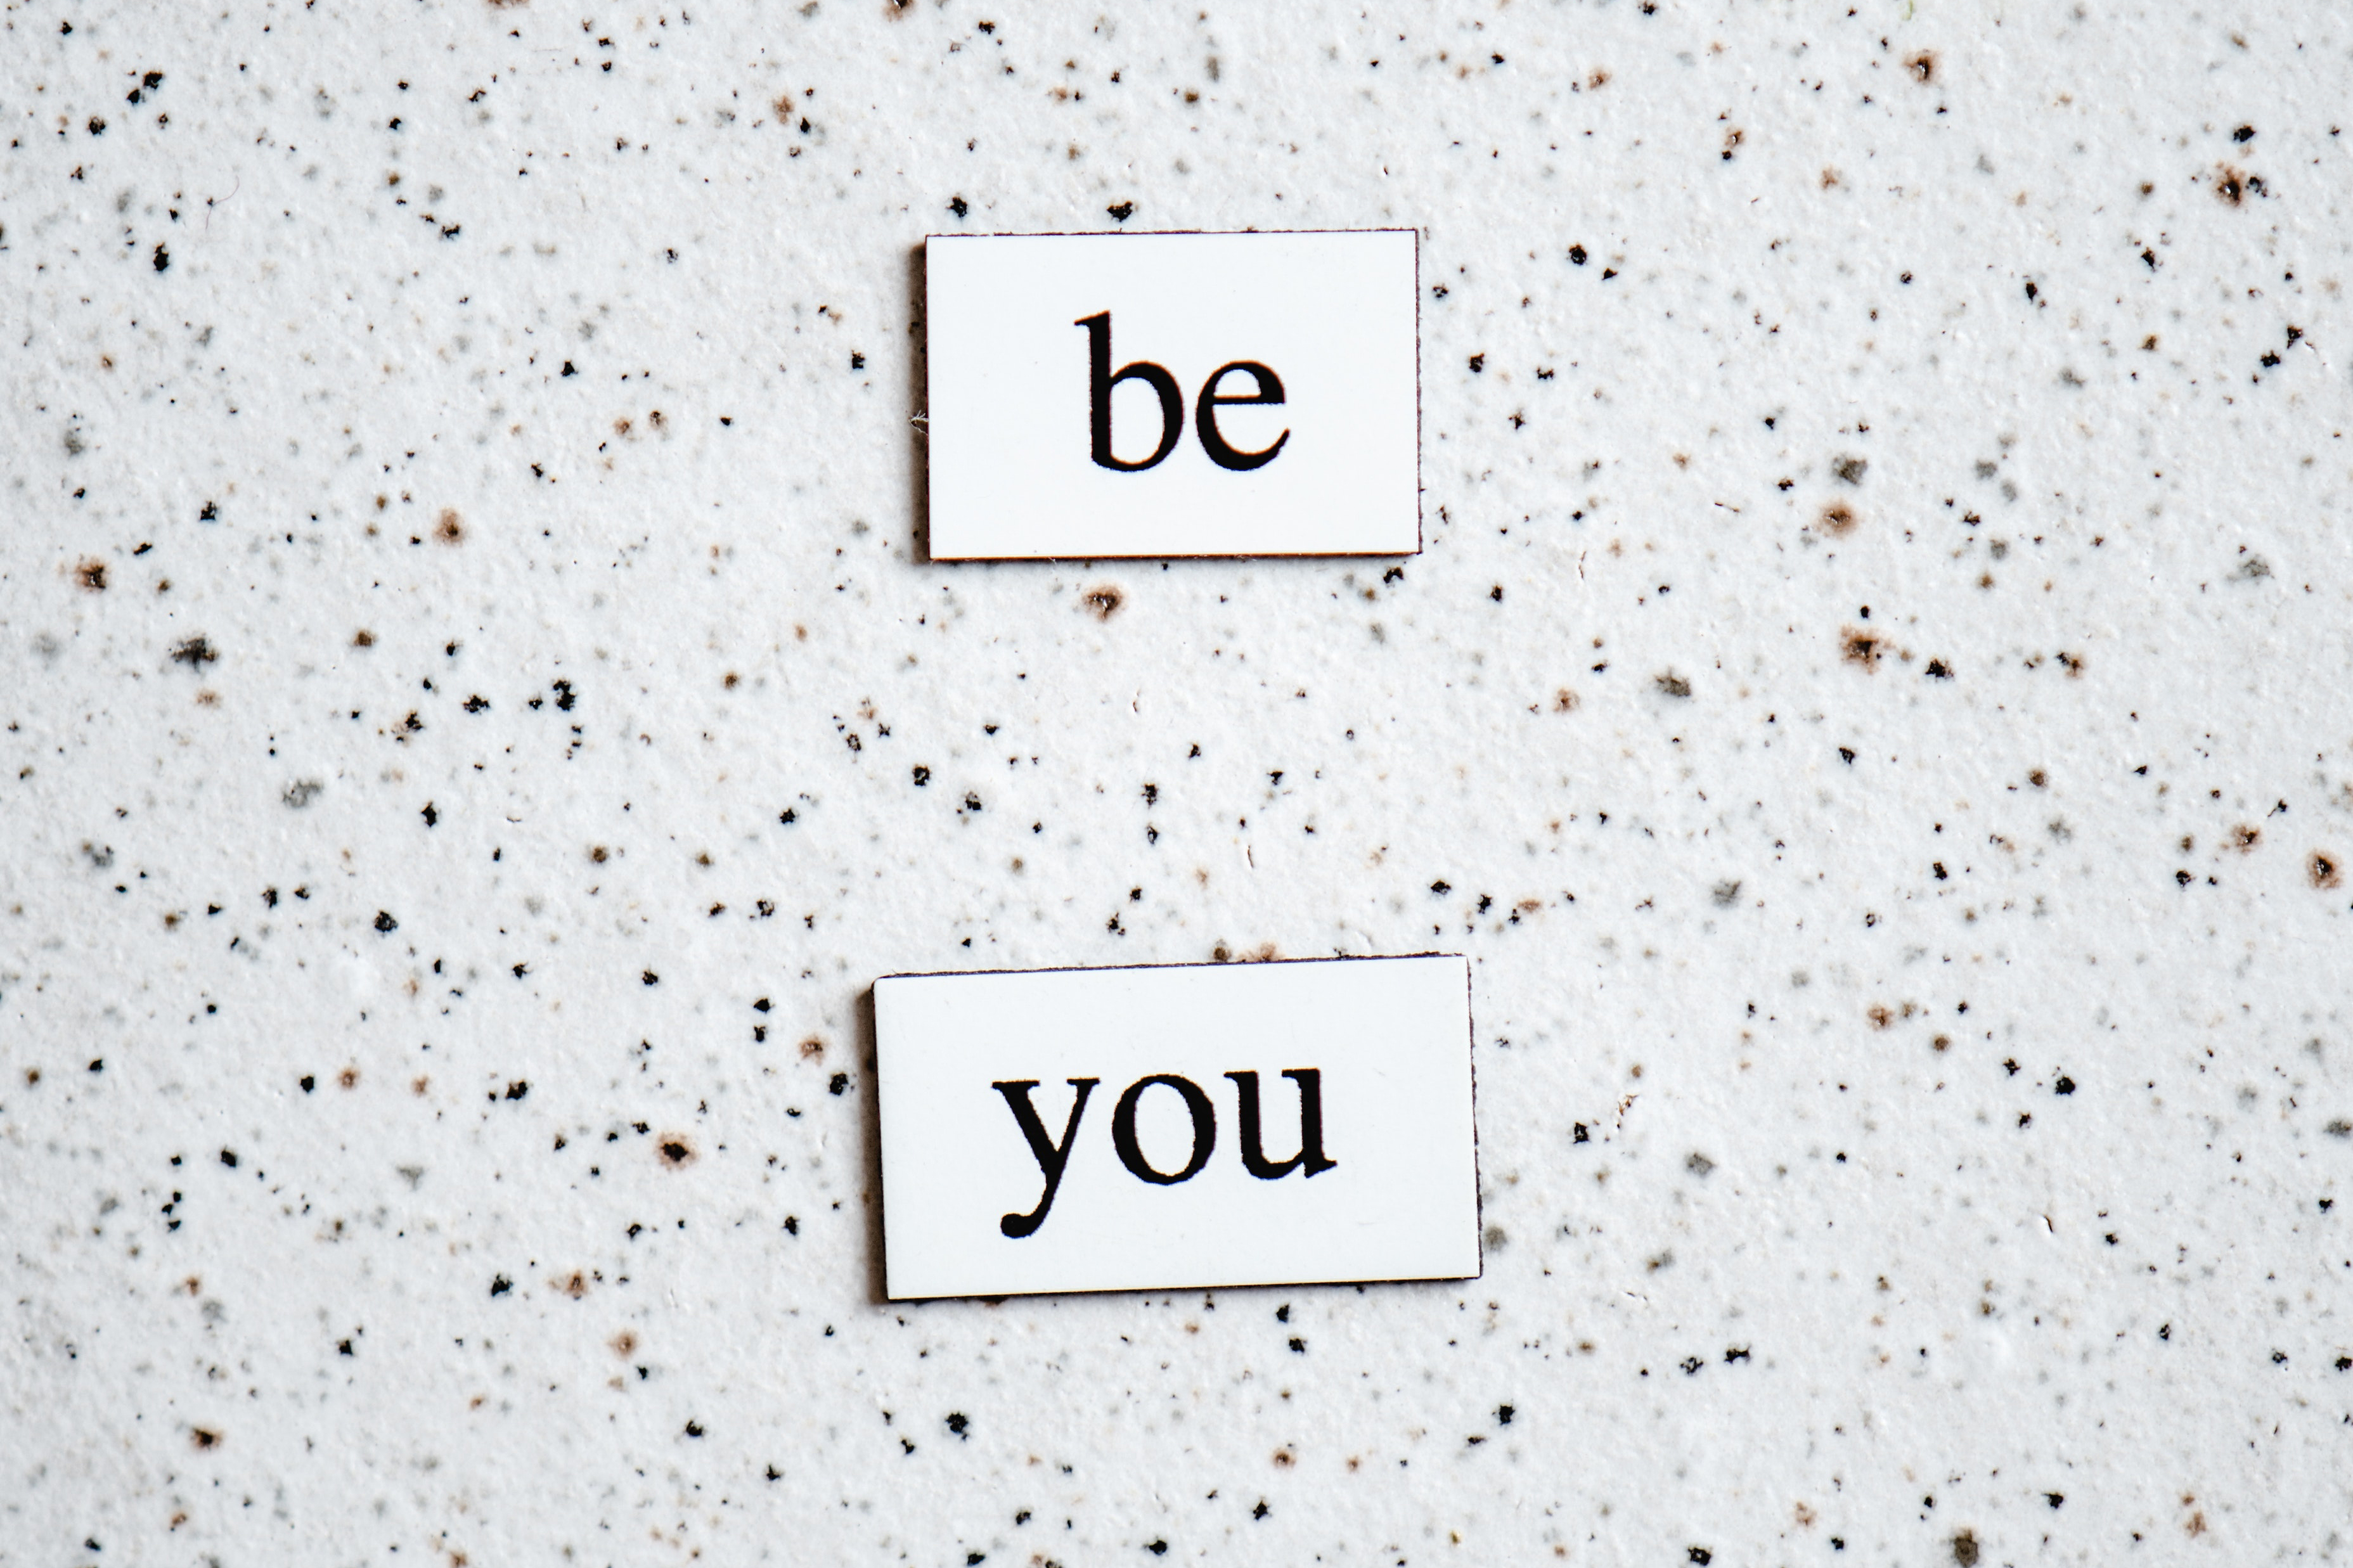 A picture of the words "be you."